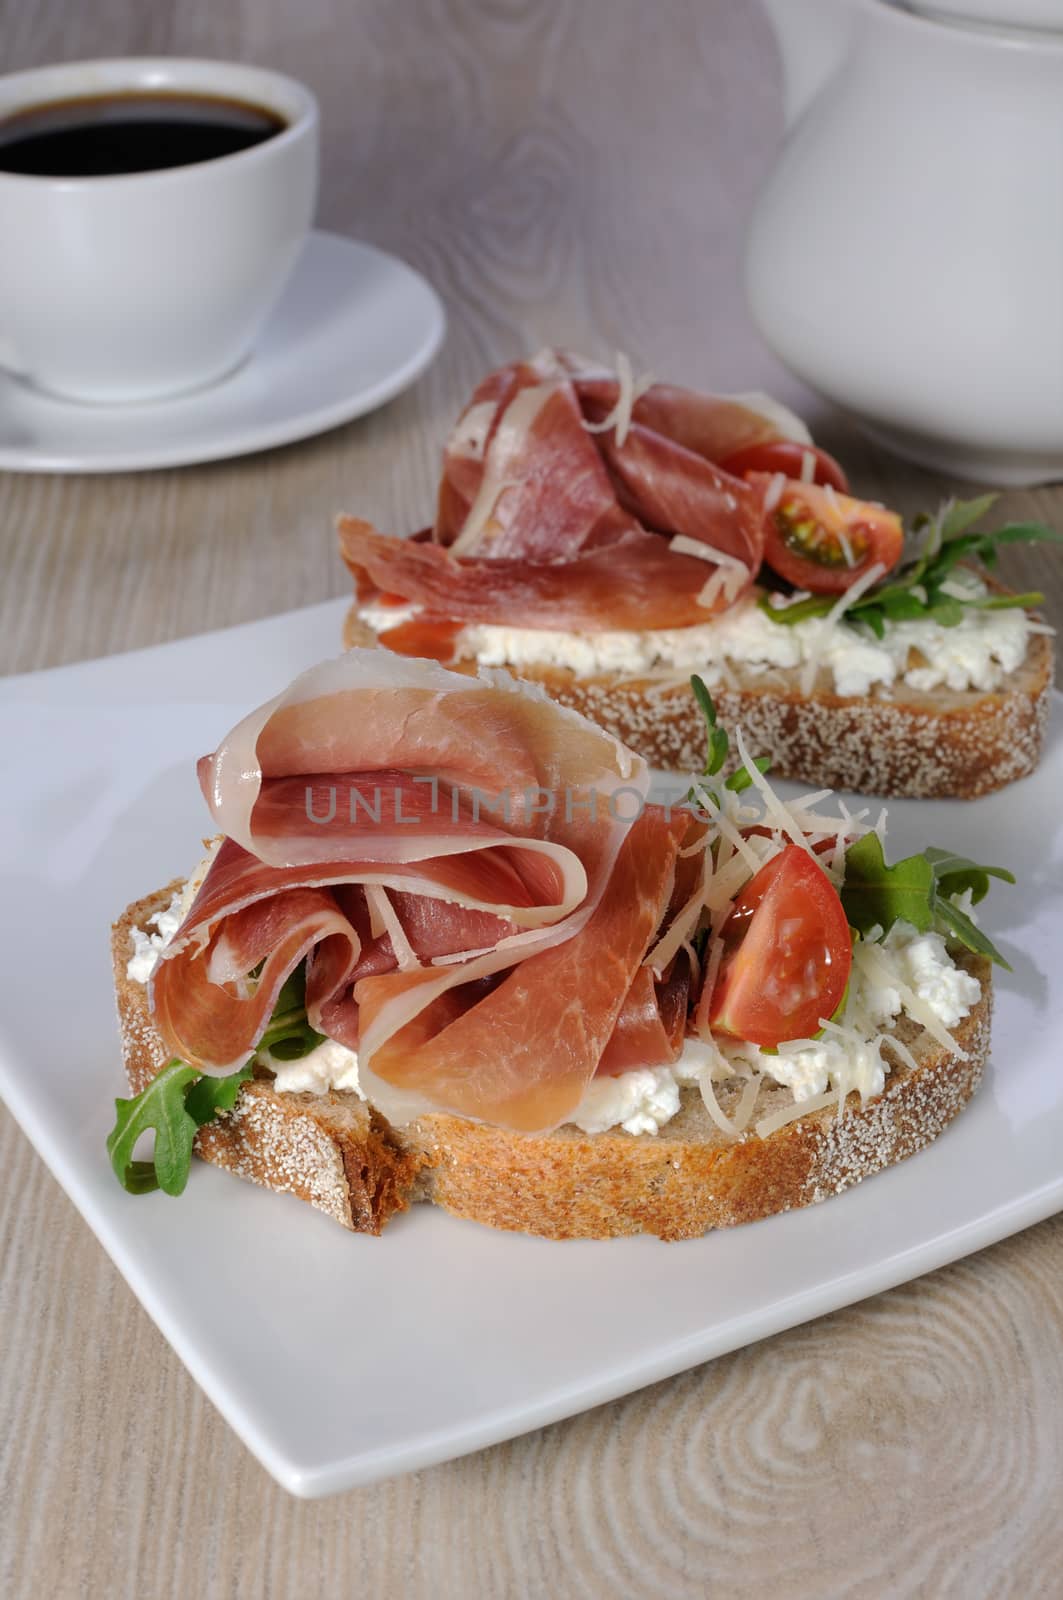 Sandwich of jamon with ricotta, arugula, cheese and a slice of cherry